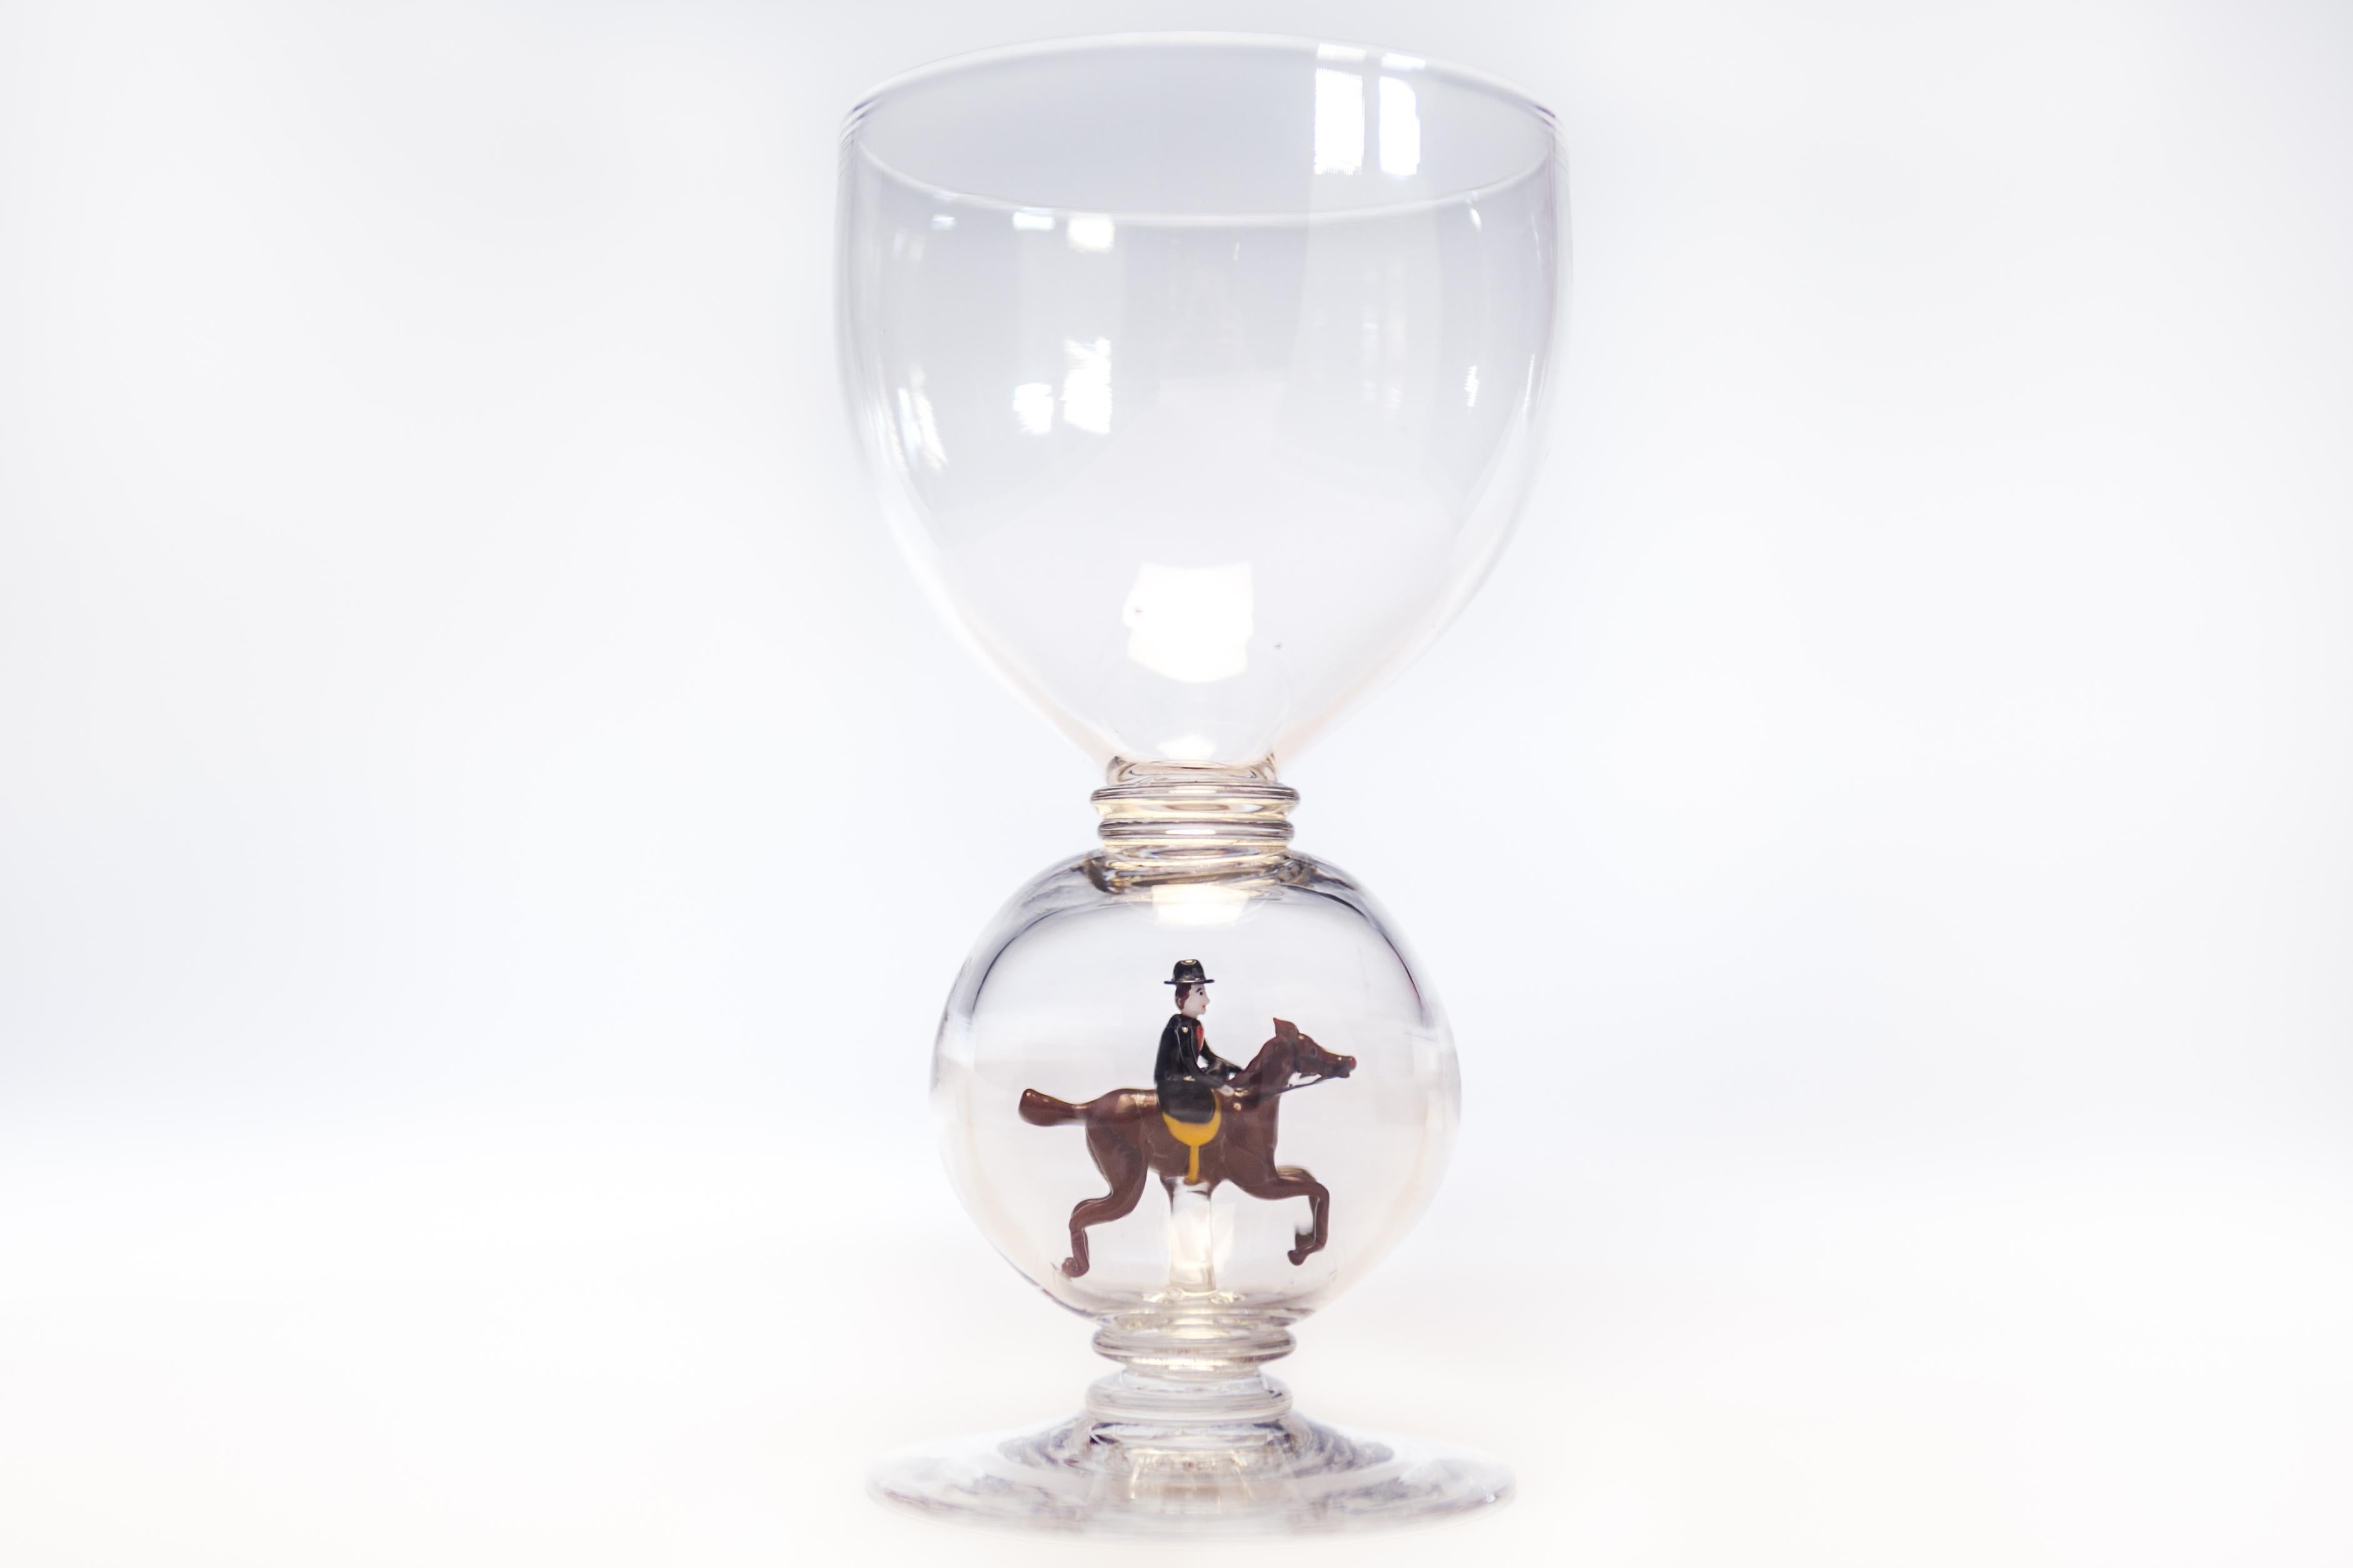 This set of 12 hand blown crystal goblets large goblets were made in England by Stevens and Williams, circa 1910. Each one features a unique figural bubble connector depicting a different hunt theme. The figures are all hand blown lamp work hunt